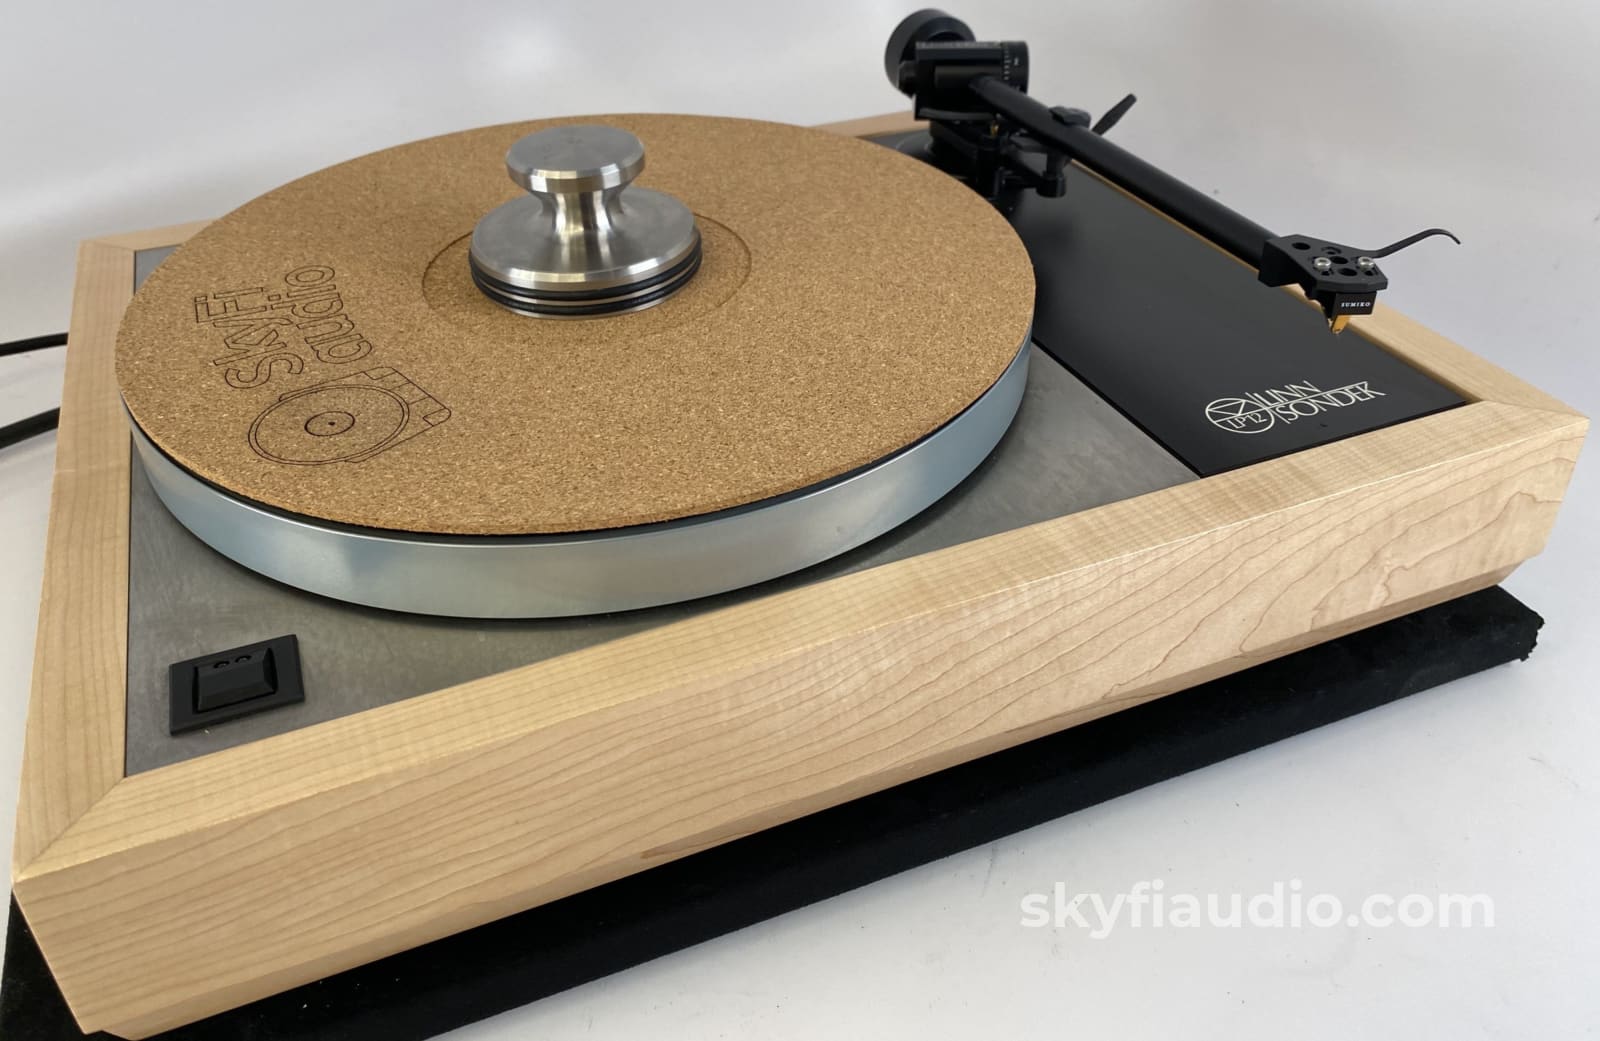 Linn Lp12 Turntable - Loaded And Upgraded With The Best Lingo Ekos...